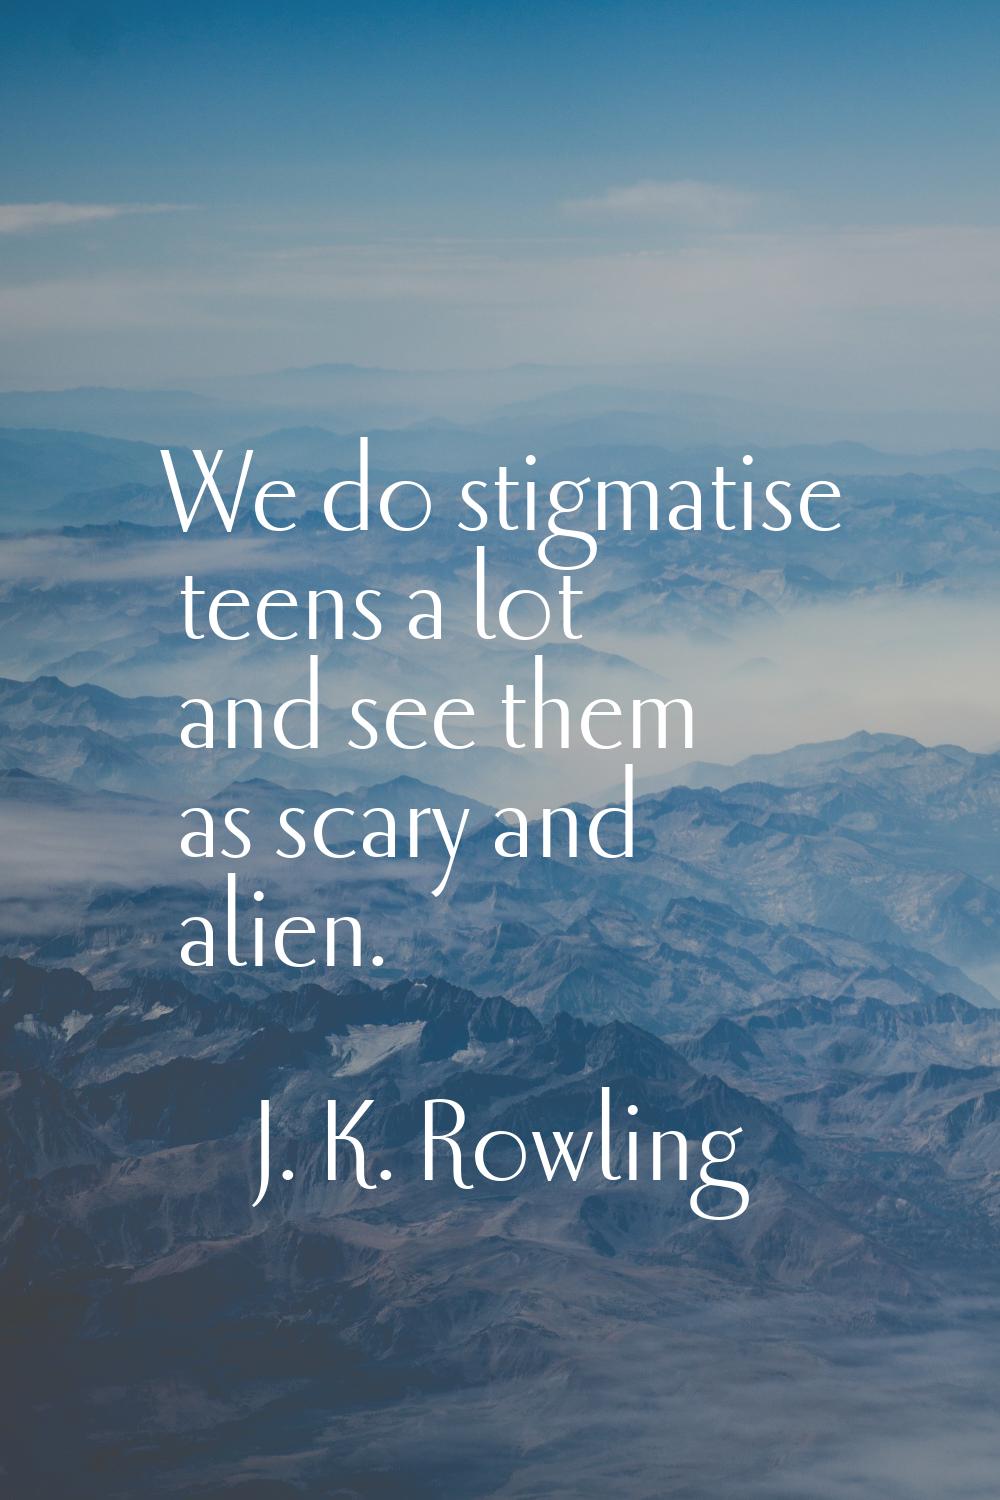 We do stigmatise teens a lot and see them as scary and alien.